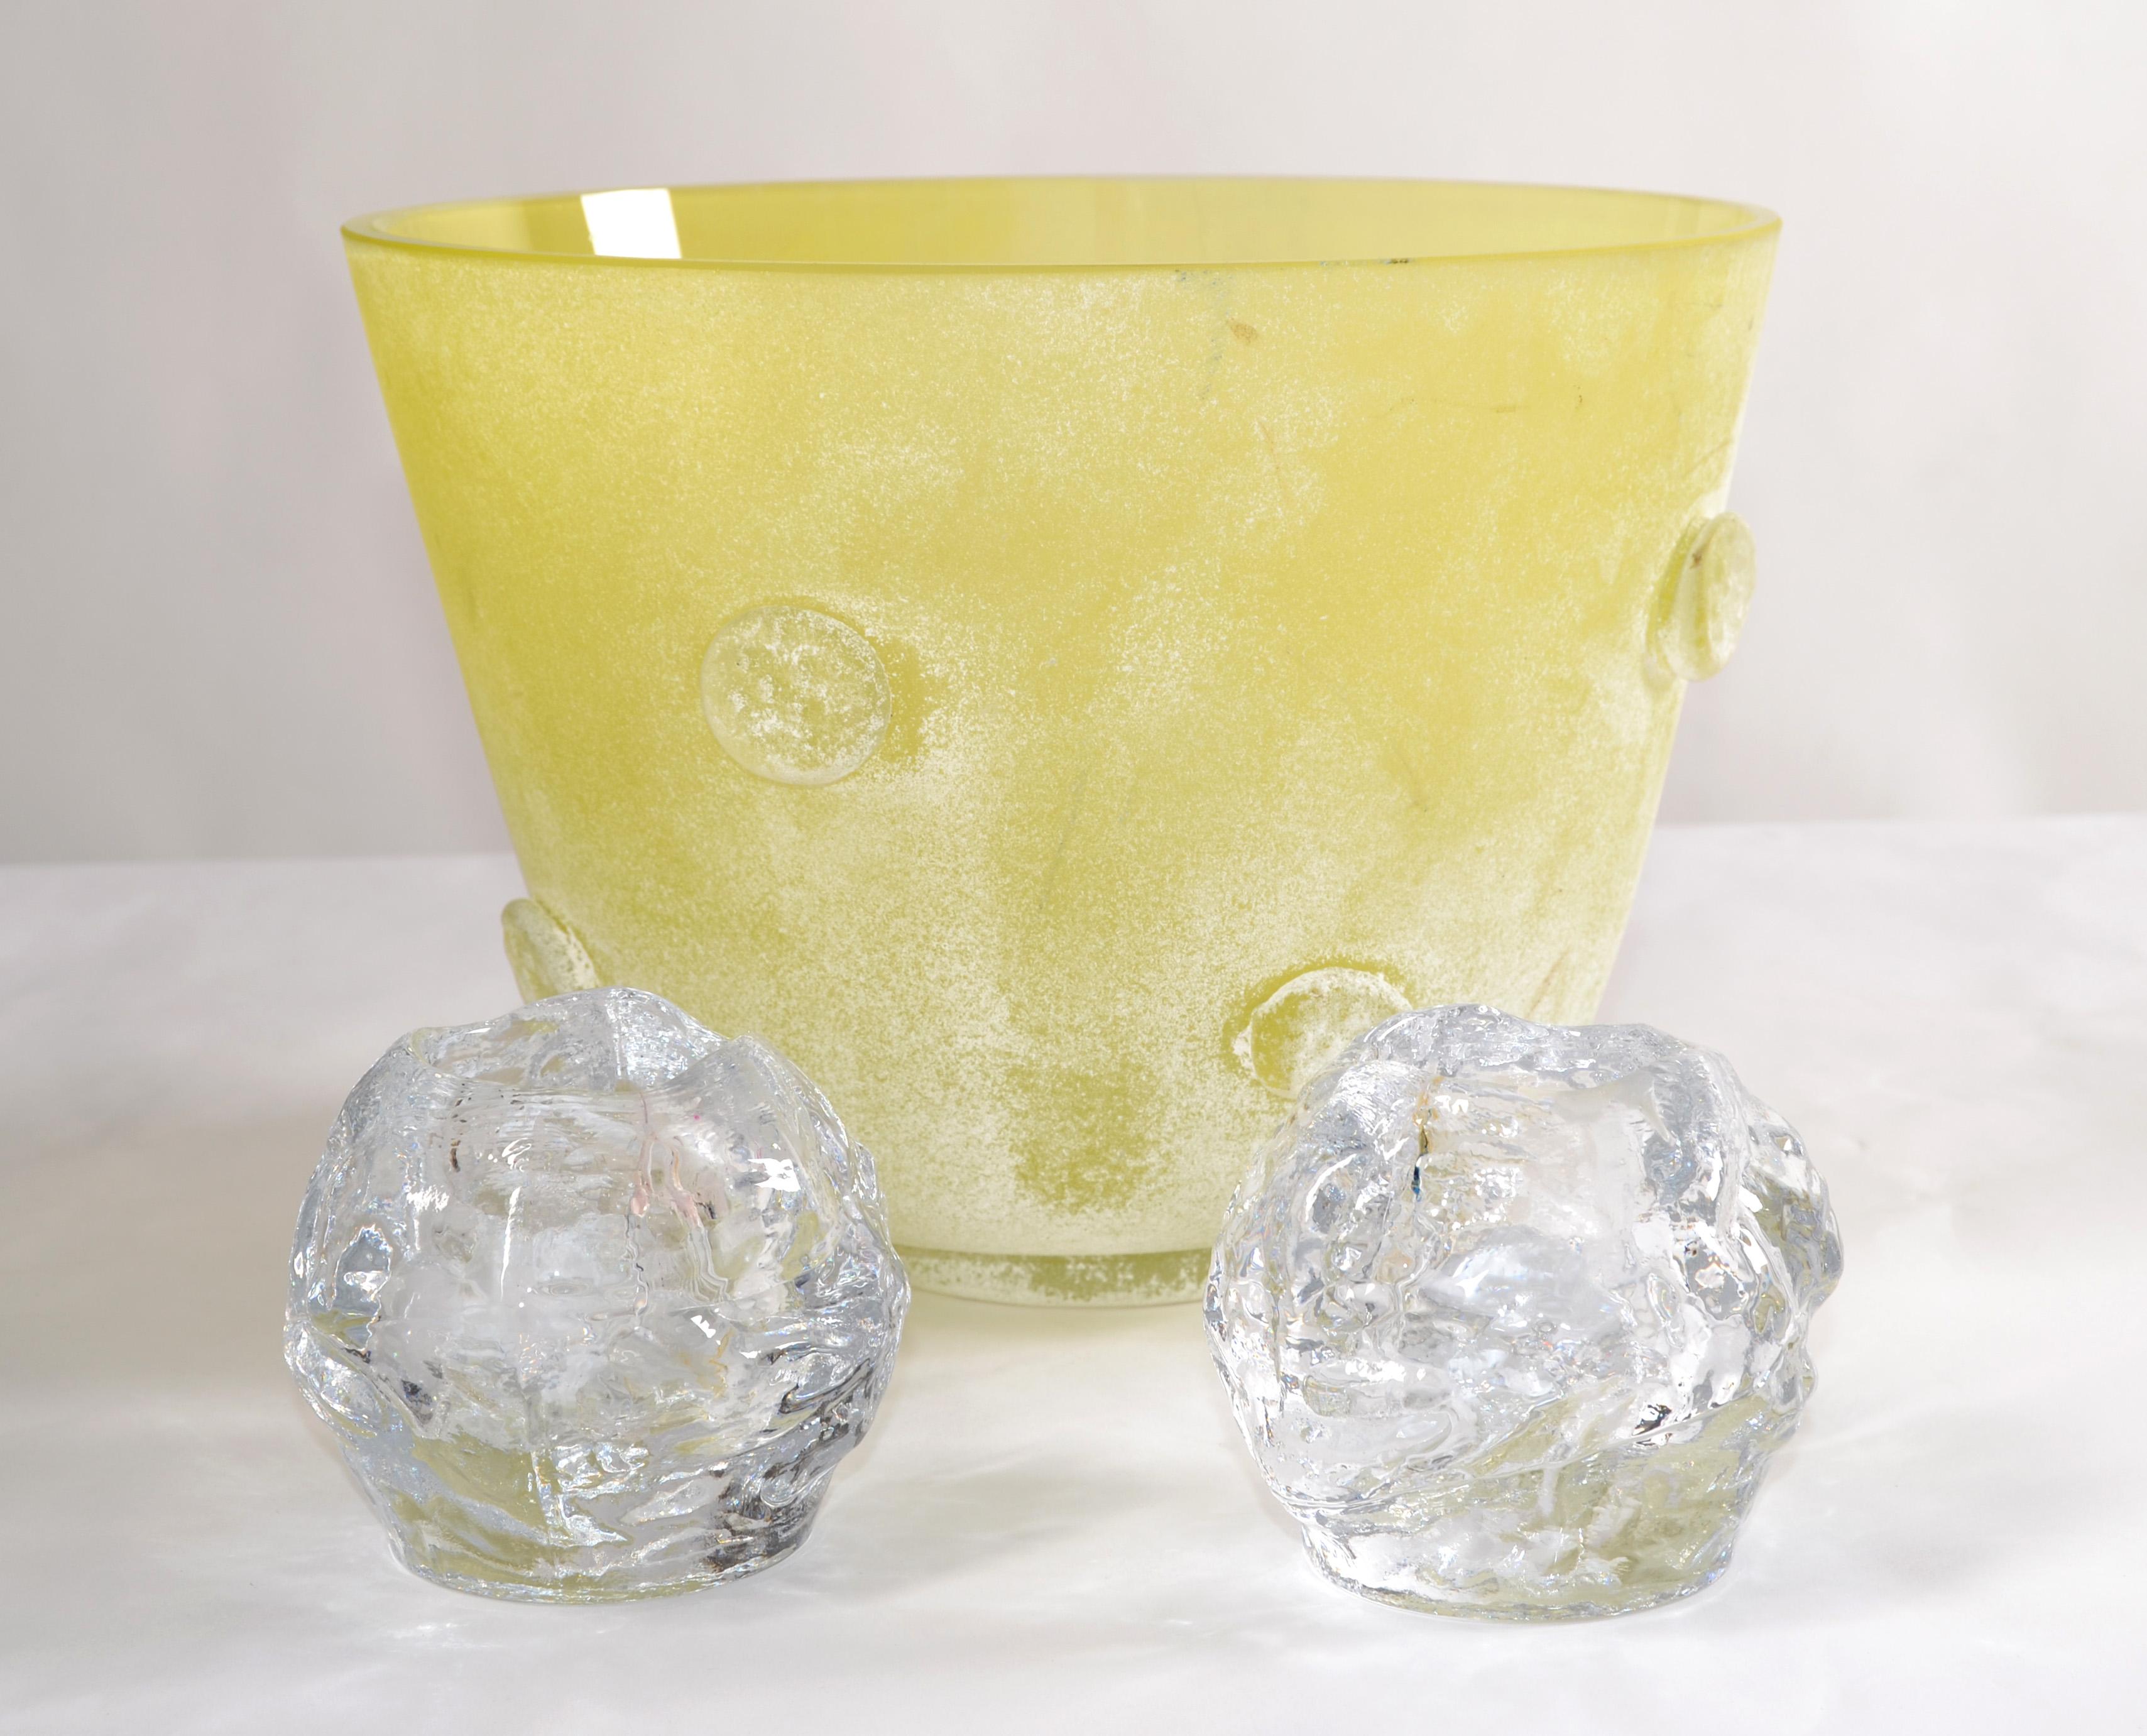 This is a set of 2 vintage 1970's Kosta Boda Snowball Candle Holders styled after Goran and Ann Warff attributed to Kosta Boda, Sweden.  
Crafted out of heavyweight, lead-free, clear crystal.
Scandinavian Modern Design made in a texture that seem to